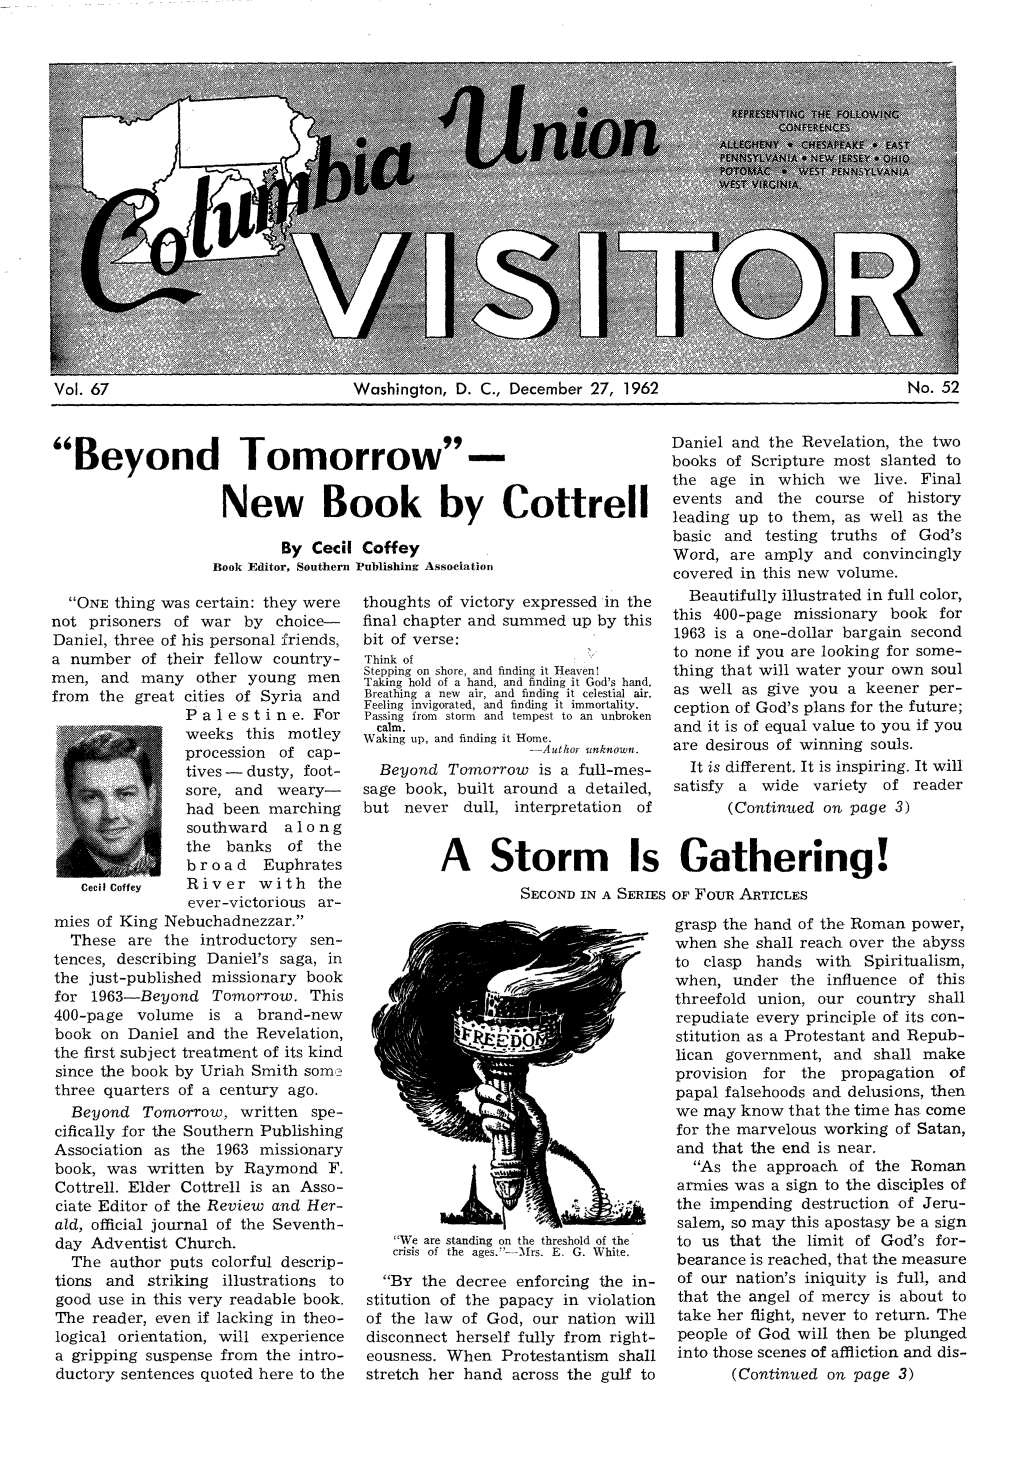 "Beyond Tomorrow" — New Book by Cottrell a Storm Is Gathering!